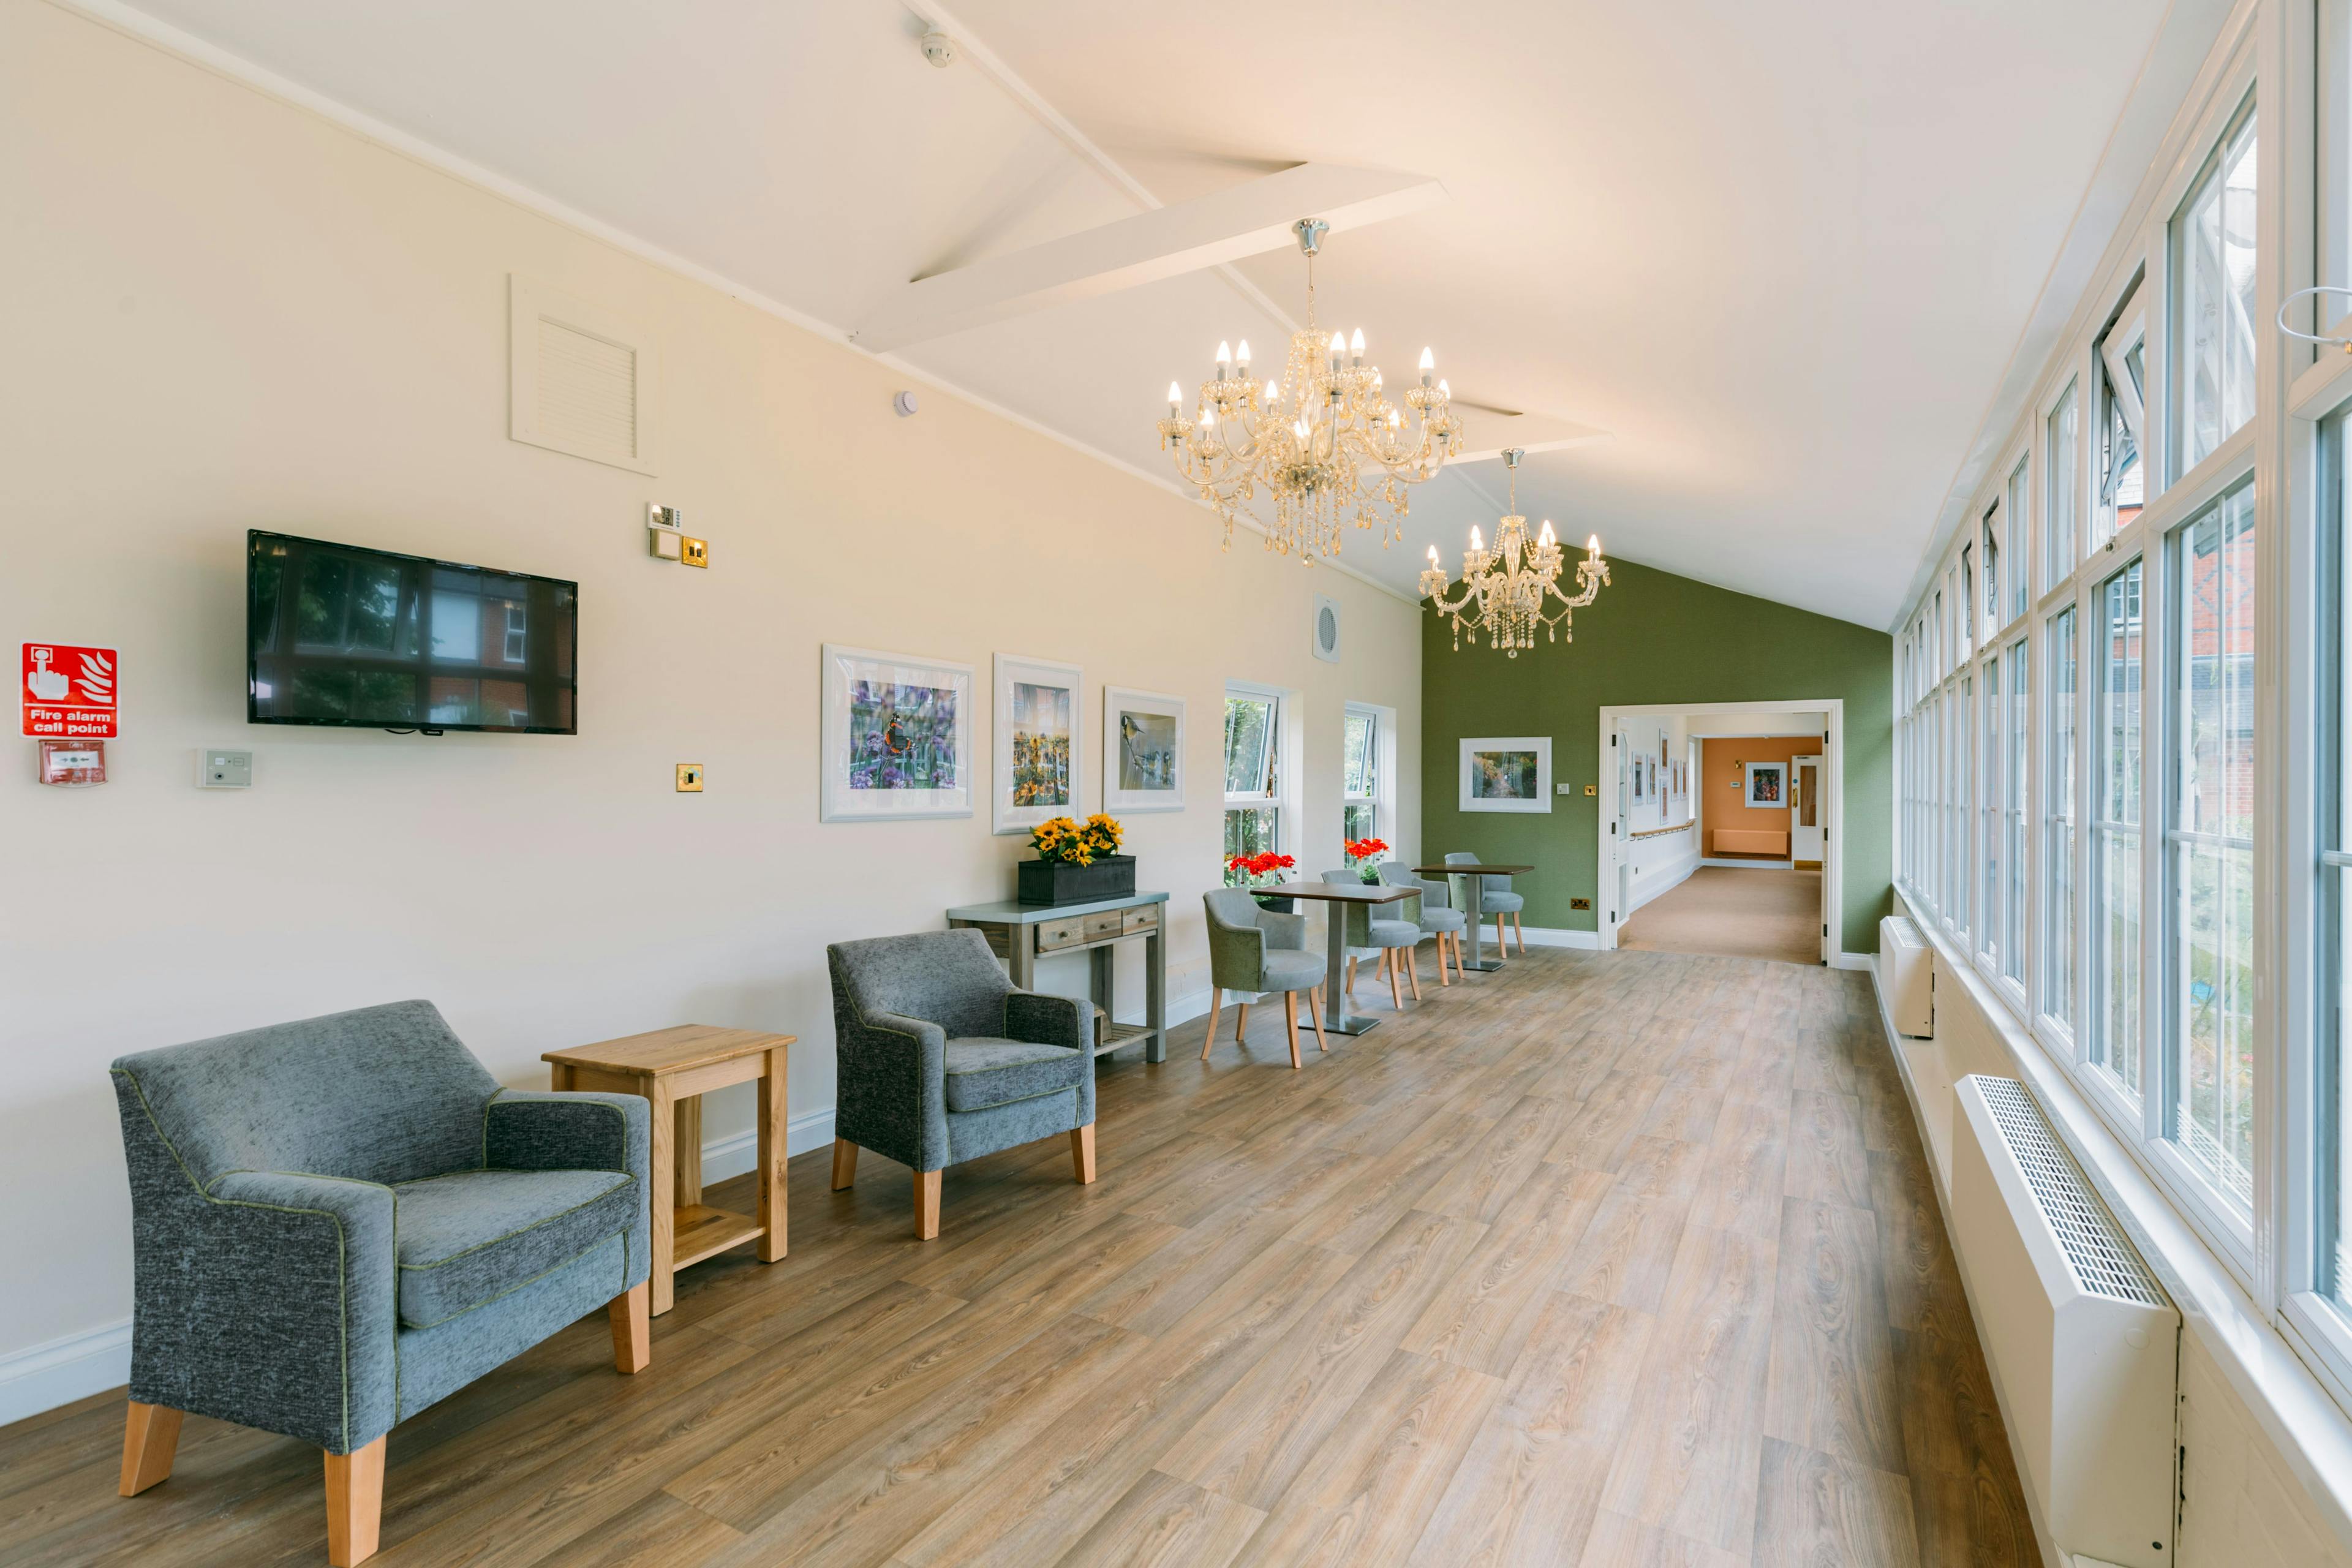 Lounge at St Thomas Care Home in Basingstoke, Hampshire